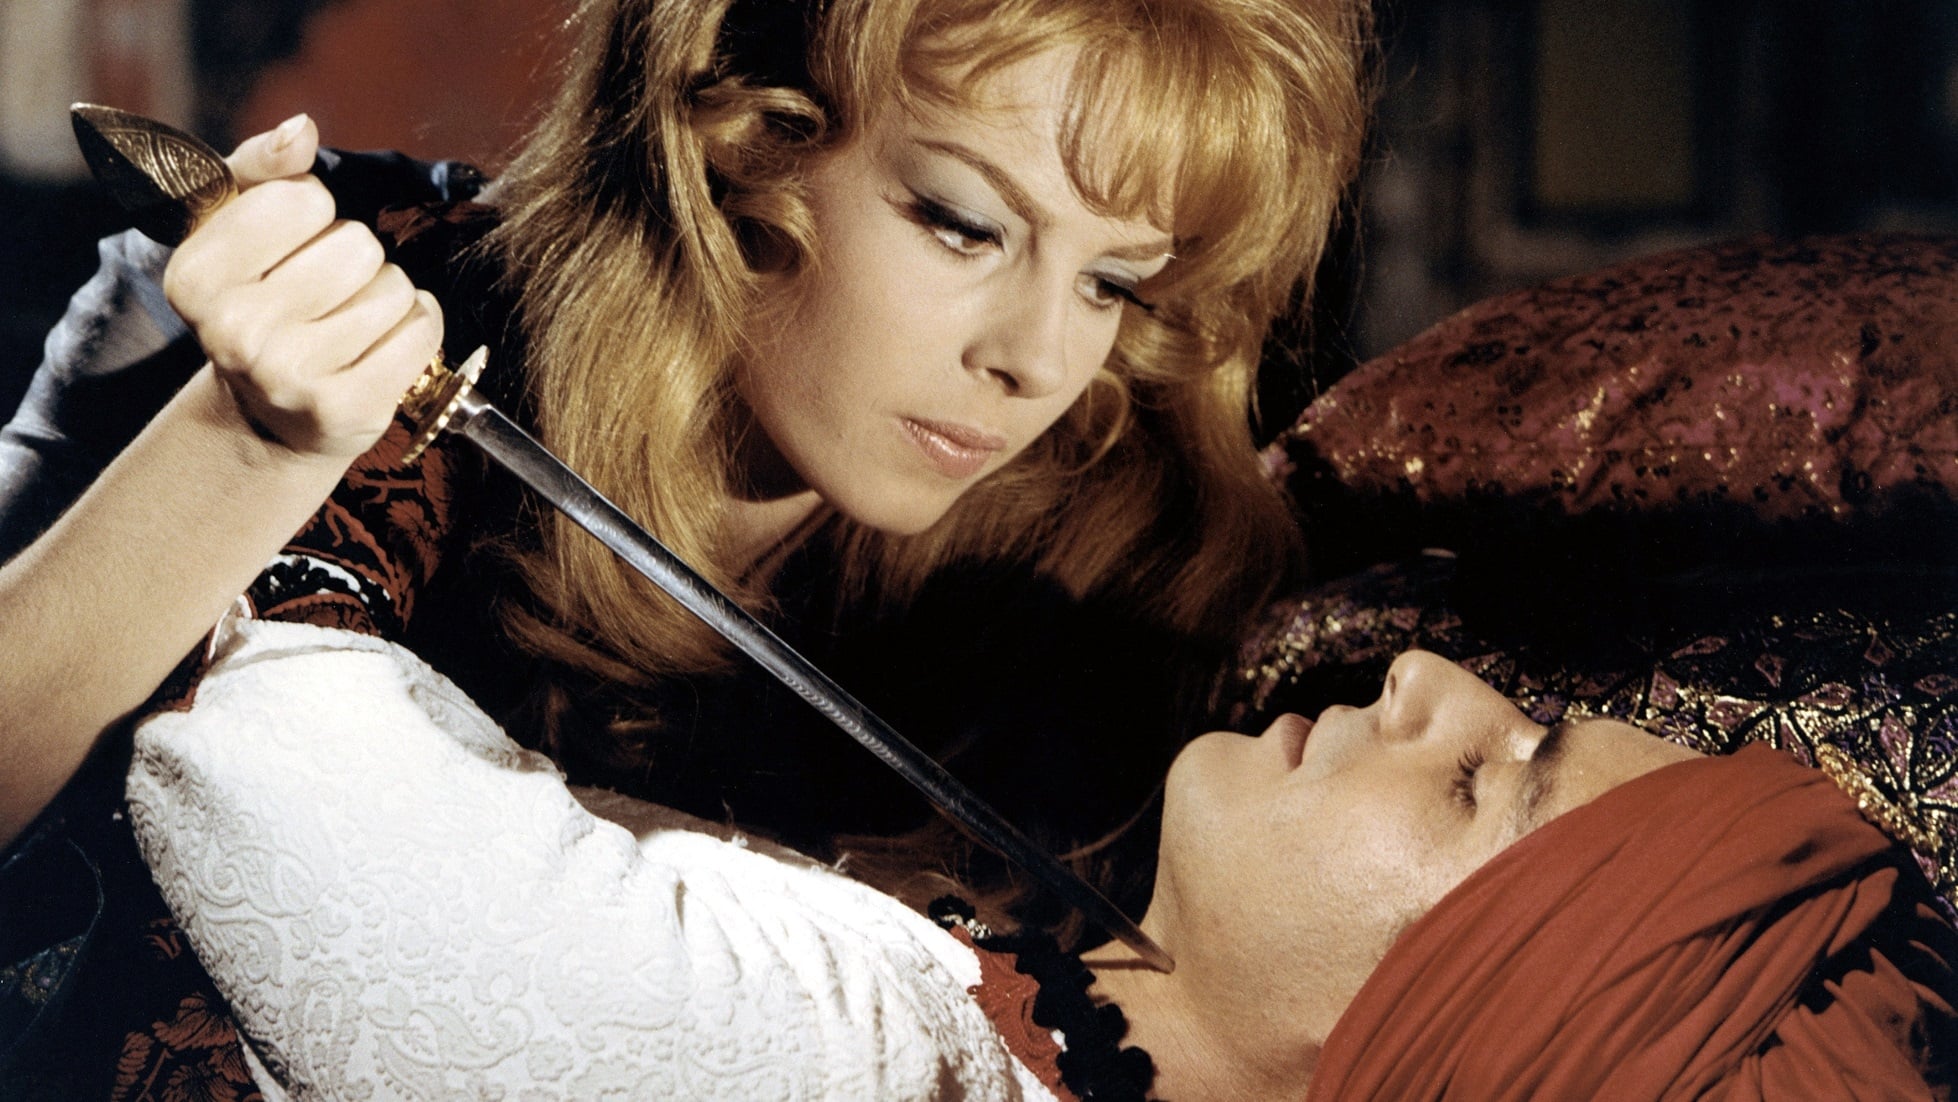 Angelique and the King (1966)